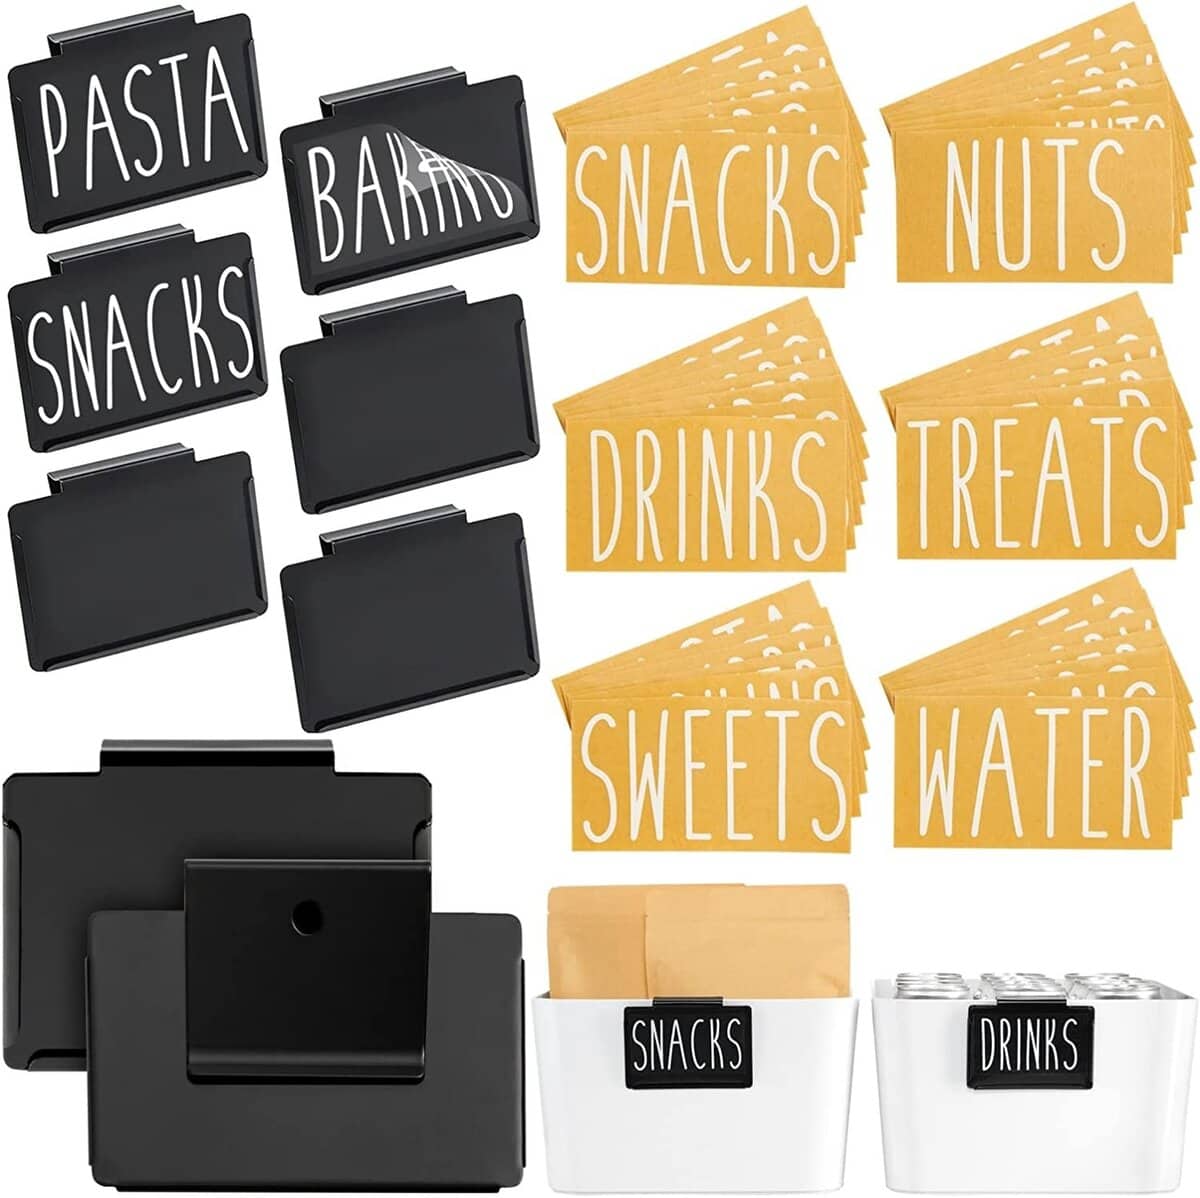 Pantry Organization Ideas - clear pantry storage labels with white font and black metal clips that they can be attached to.